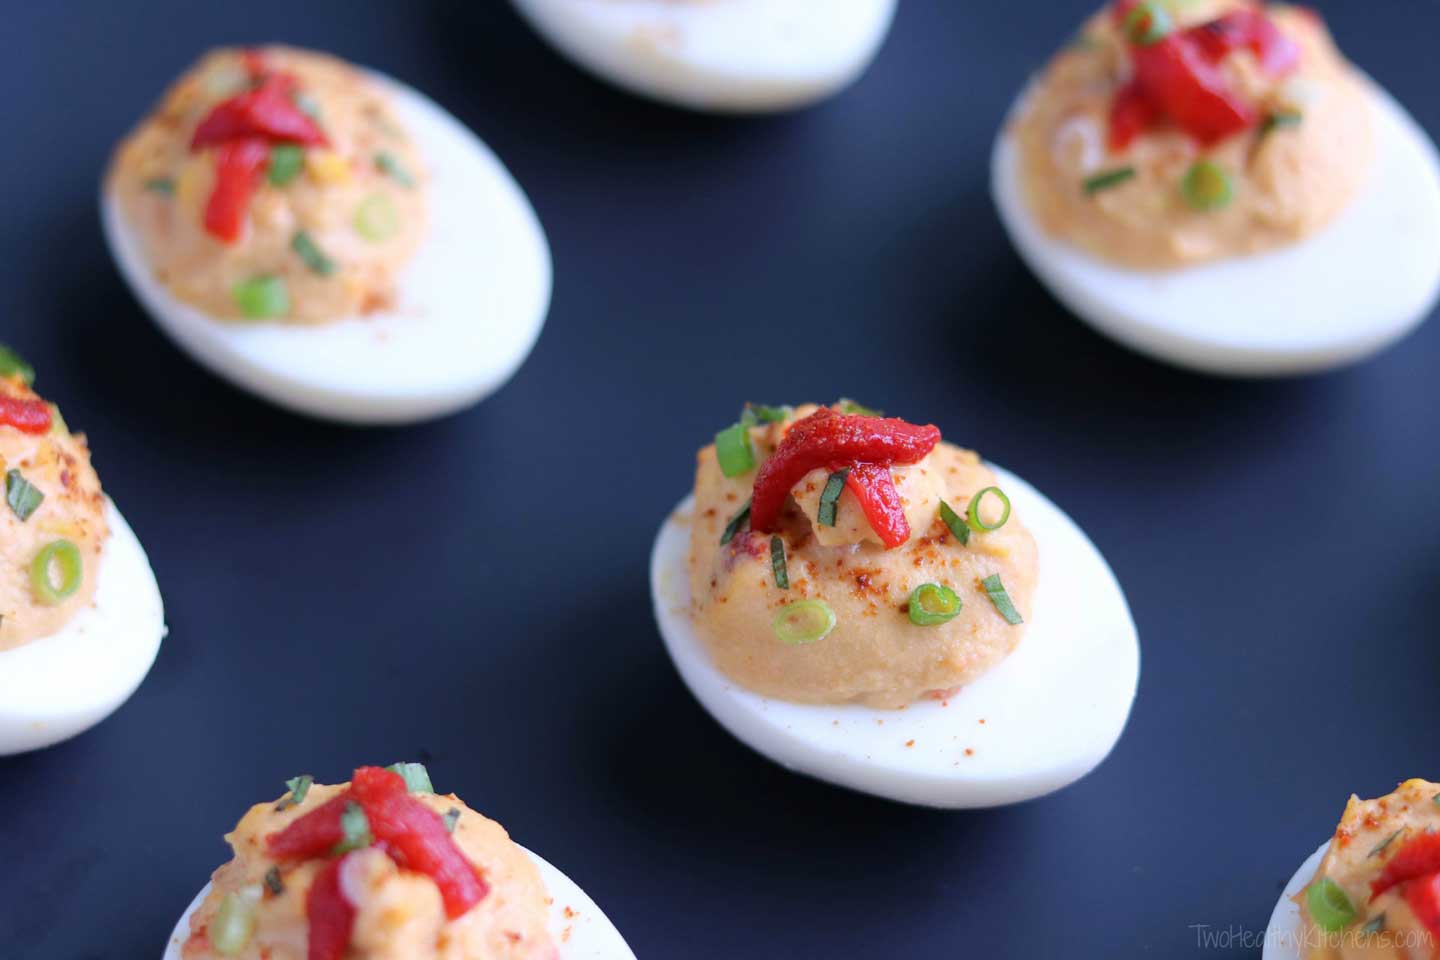 An easy, protein-packed, make-ahead! This Mediterranean Hummus Deviled Egg recipe features creamy roasted red pepper hummus and fresh basil. Fast enough for last-minute picnics and tailgates, yet stunning enough for fancy hors d’oeuvres parties! 